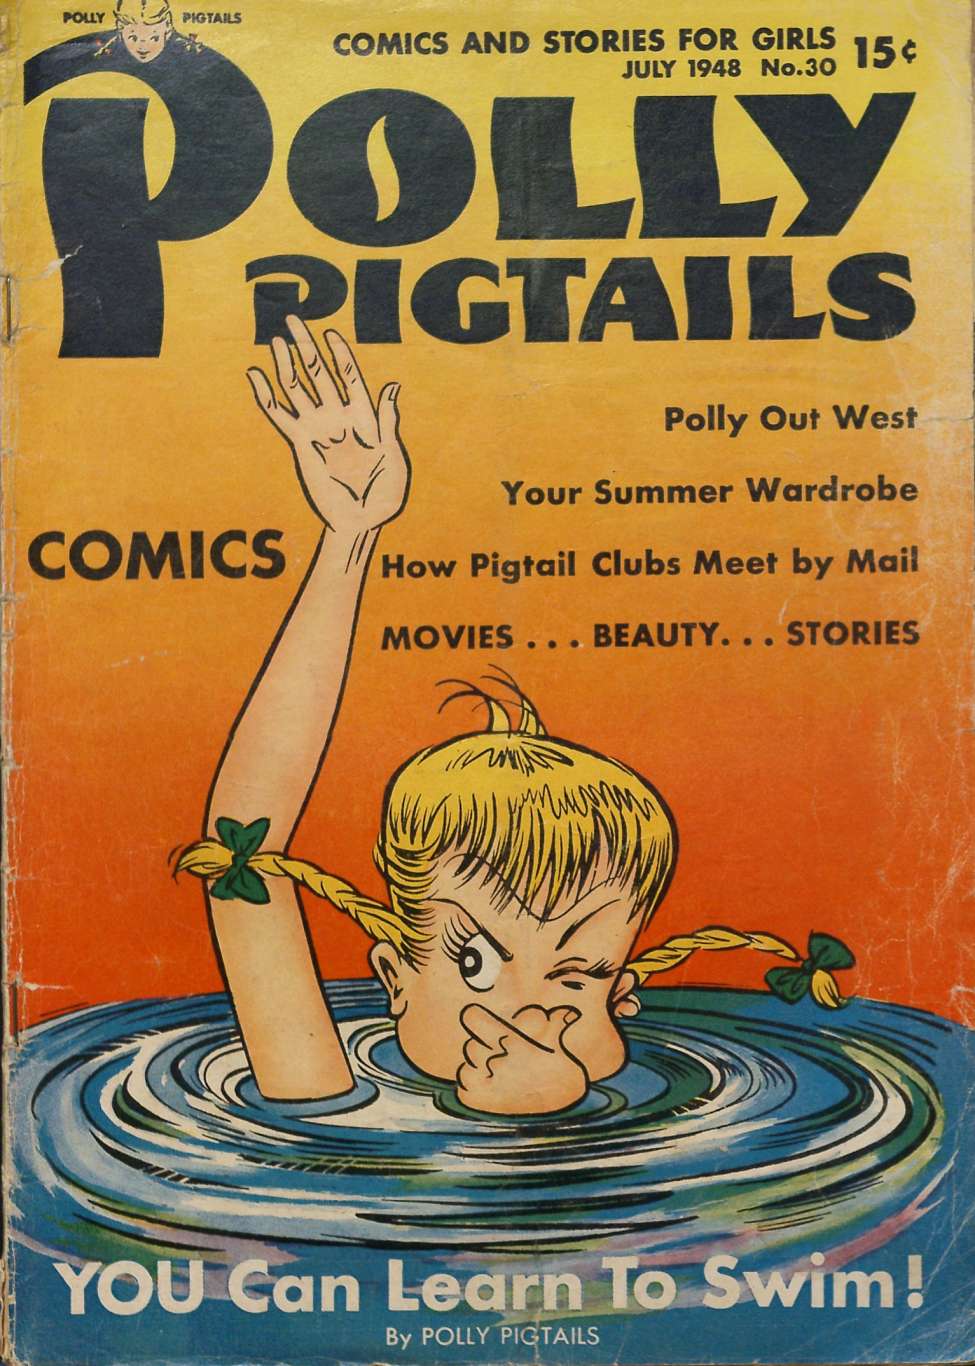 Book Cover For Polly Pigtails 30